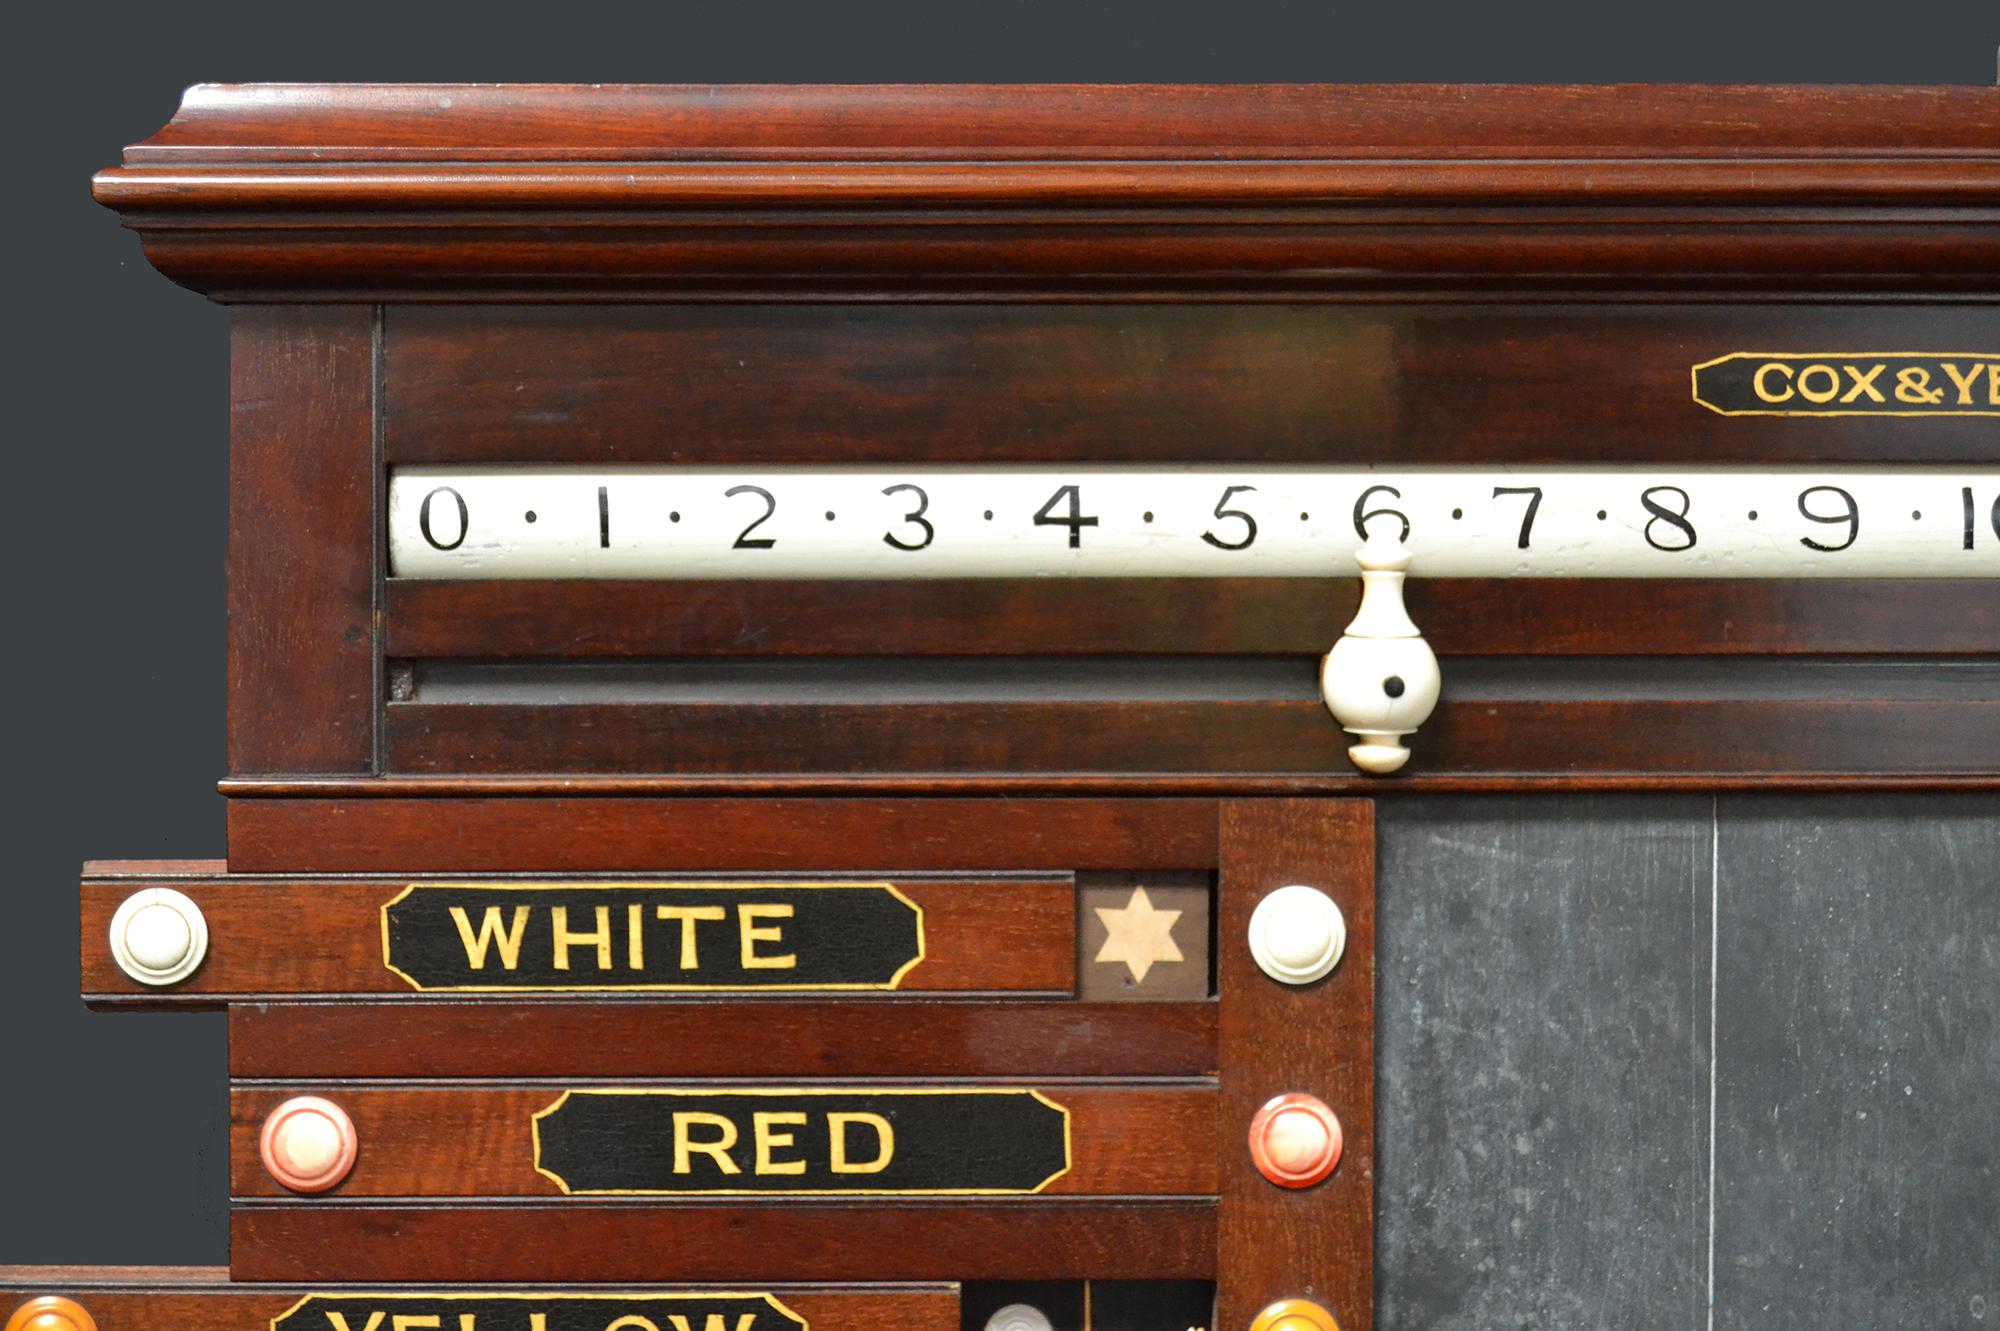 A beautiful mahogany framed scoring cabinet by Cox & Yeman circa 1890, featuring hand painted sliding panels ,revolving numbers and a central slate panel.

Mr Henry Cox and Mr Edward Yeman joined forces at some time in the 1850s to form their own